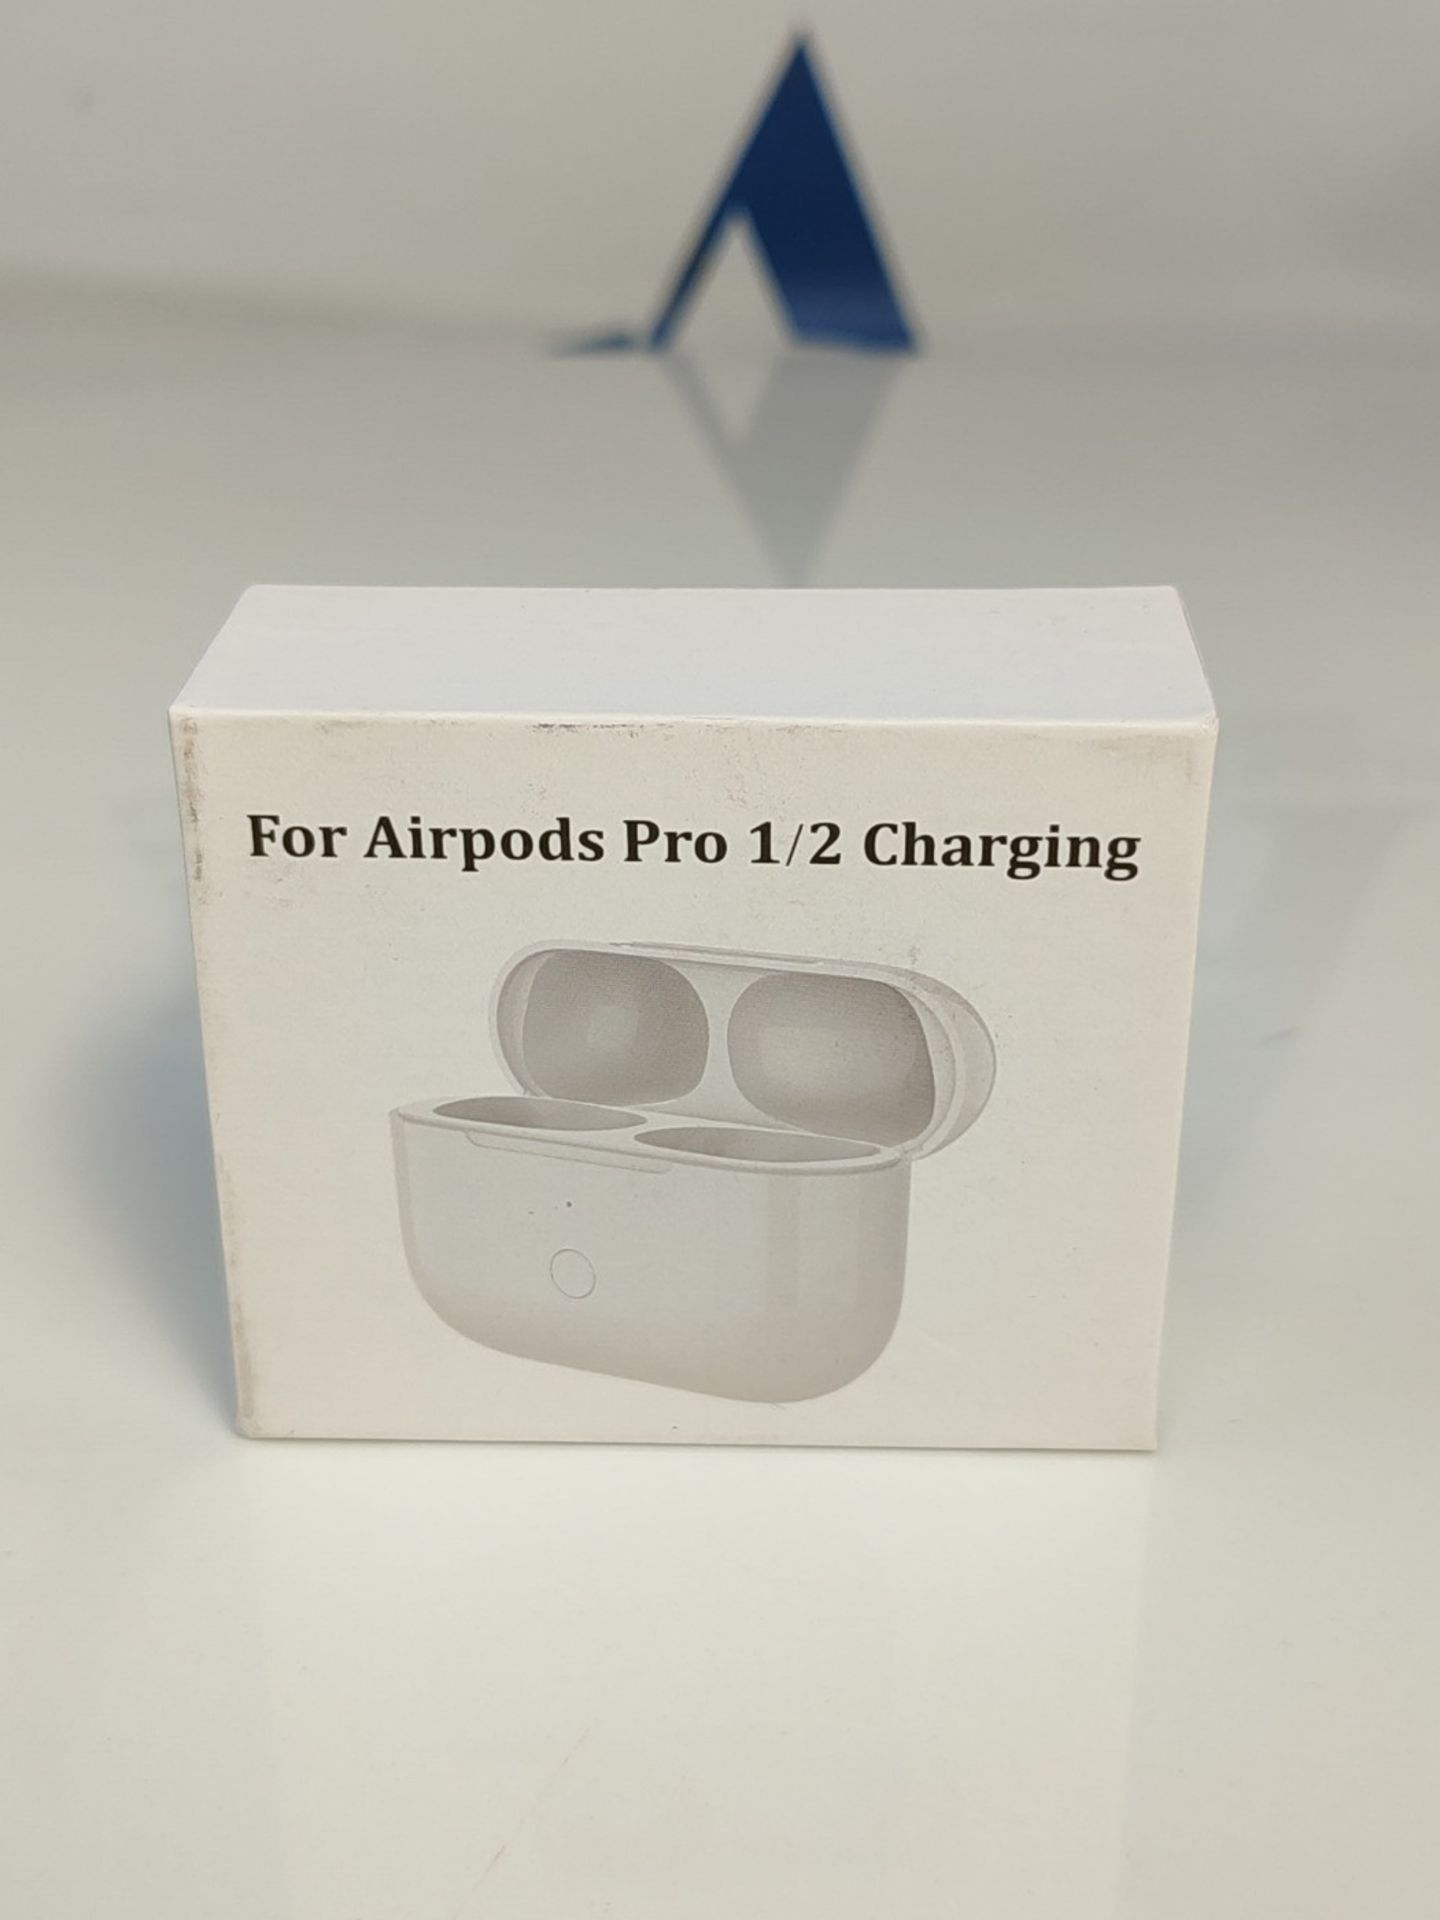 Wireless Charging Case for AirPods Pro 1 and AirPods Pro 2, Replacement Charging Case - Image 2 of 6